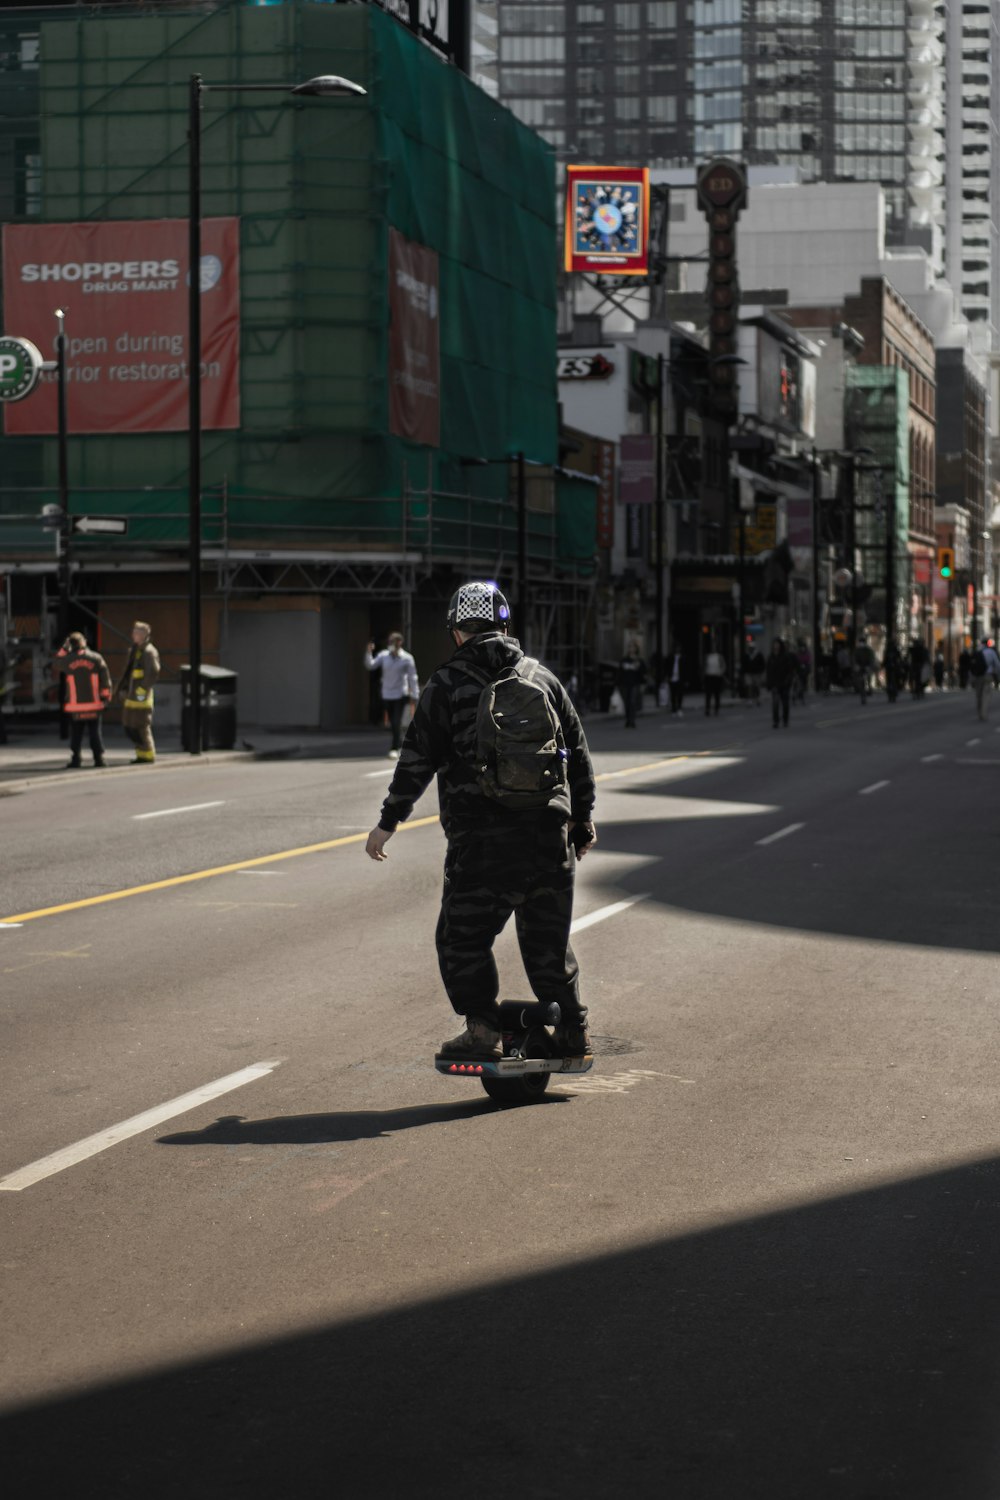 man in black jacket and pants riding on black skateboard on road during daytime